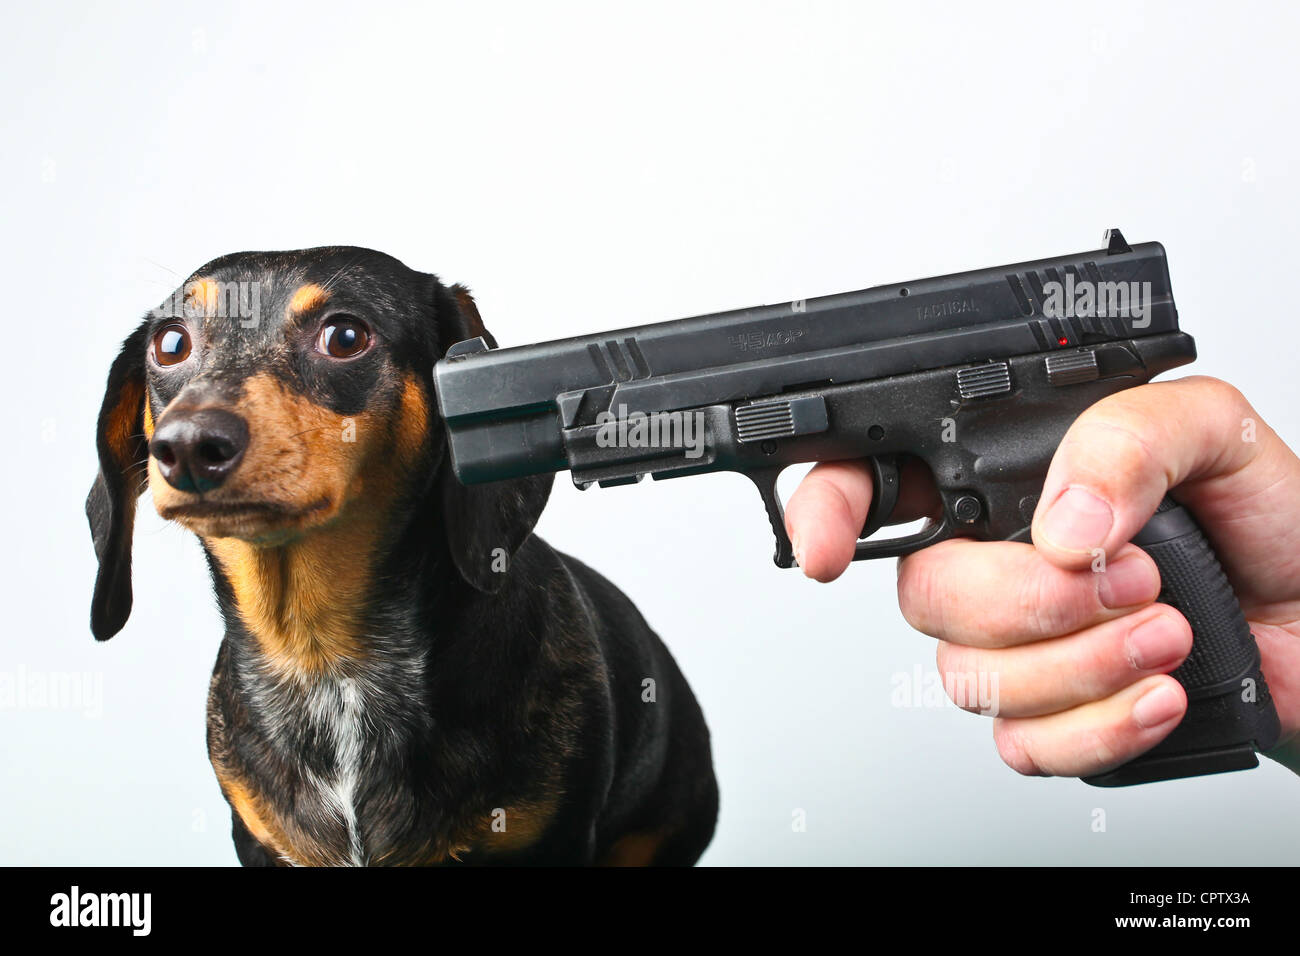 Small dog (dachshund) looks concerned as a man's hand points a pistol to her head. Stock Photo